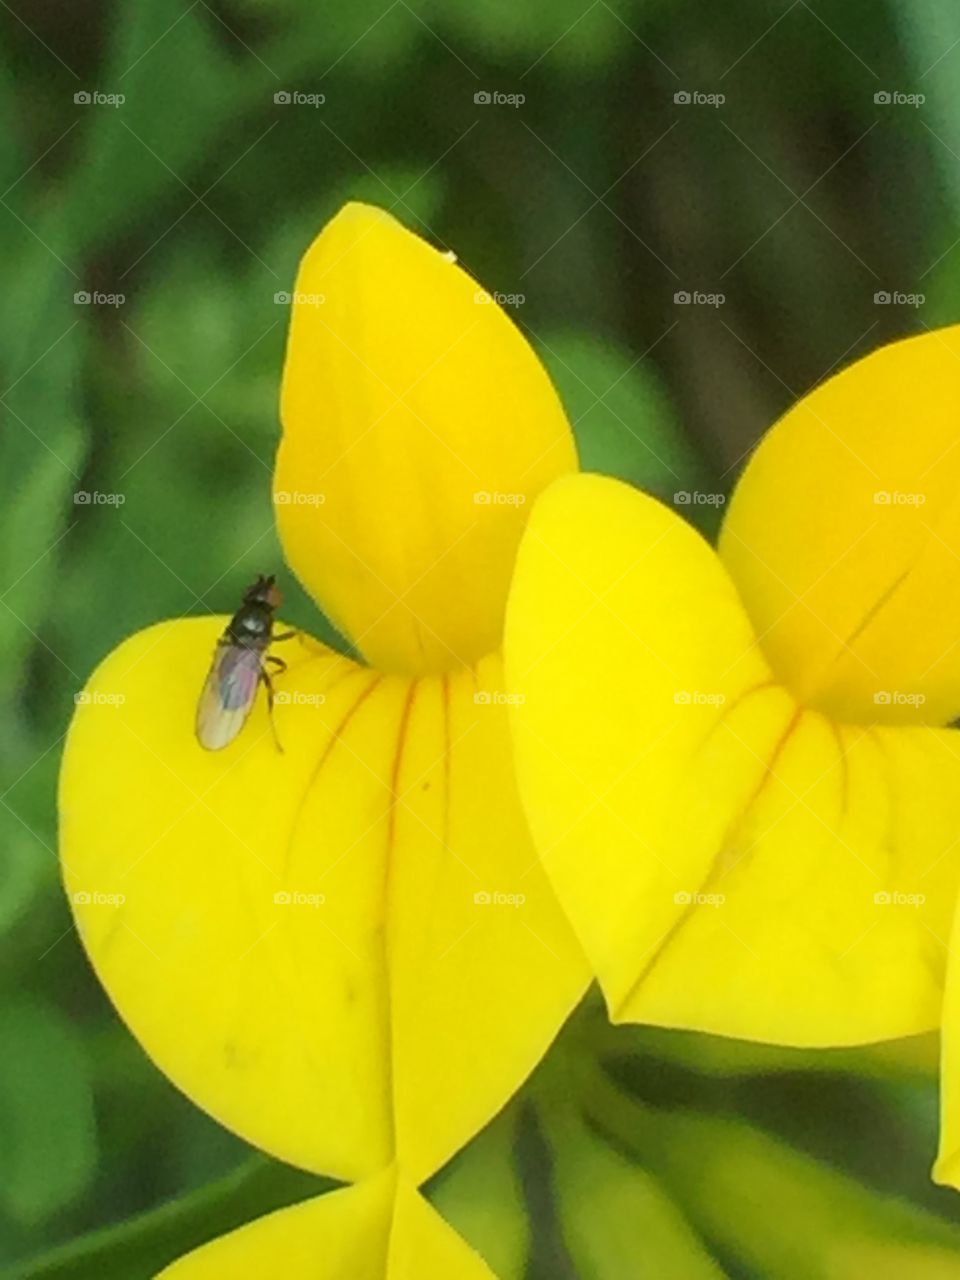 Fly on a flower.